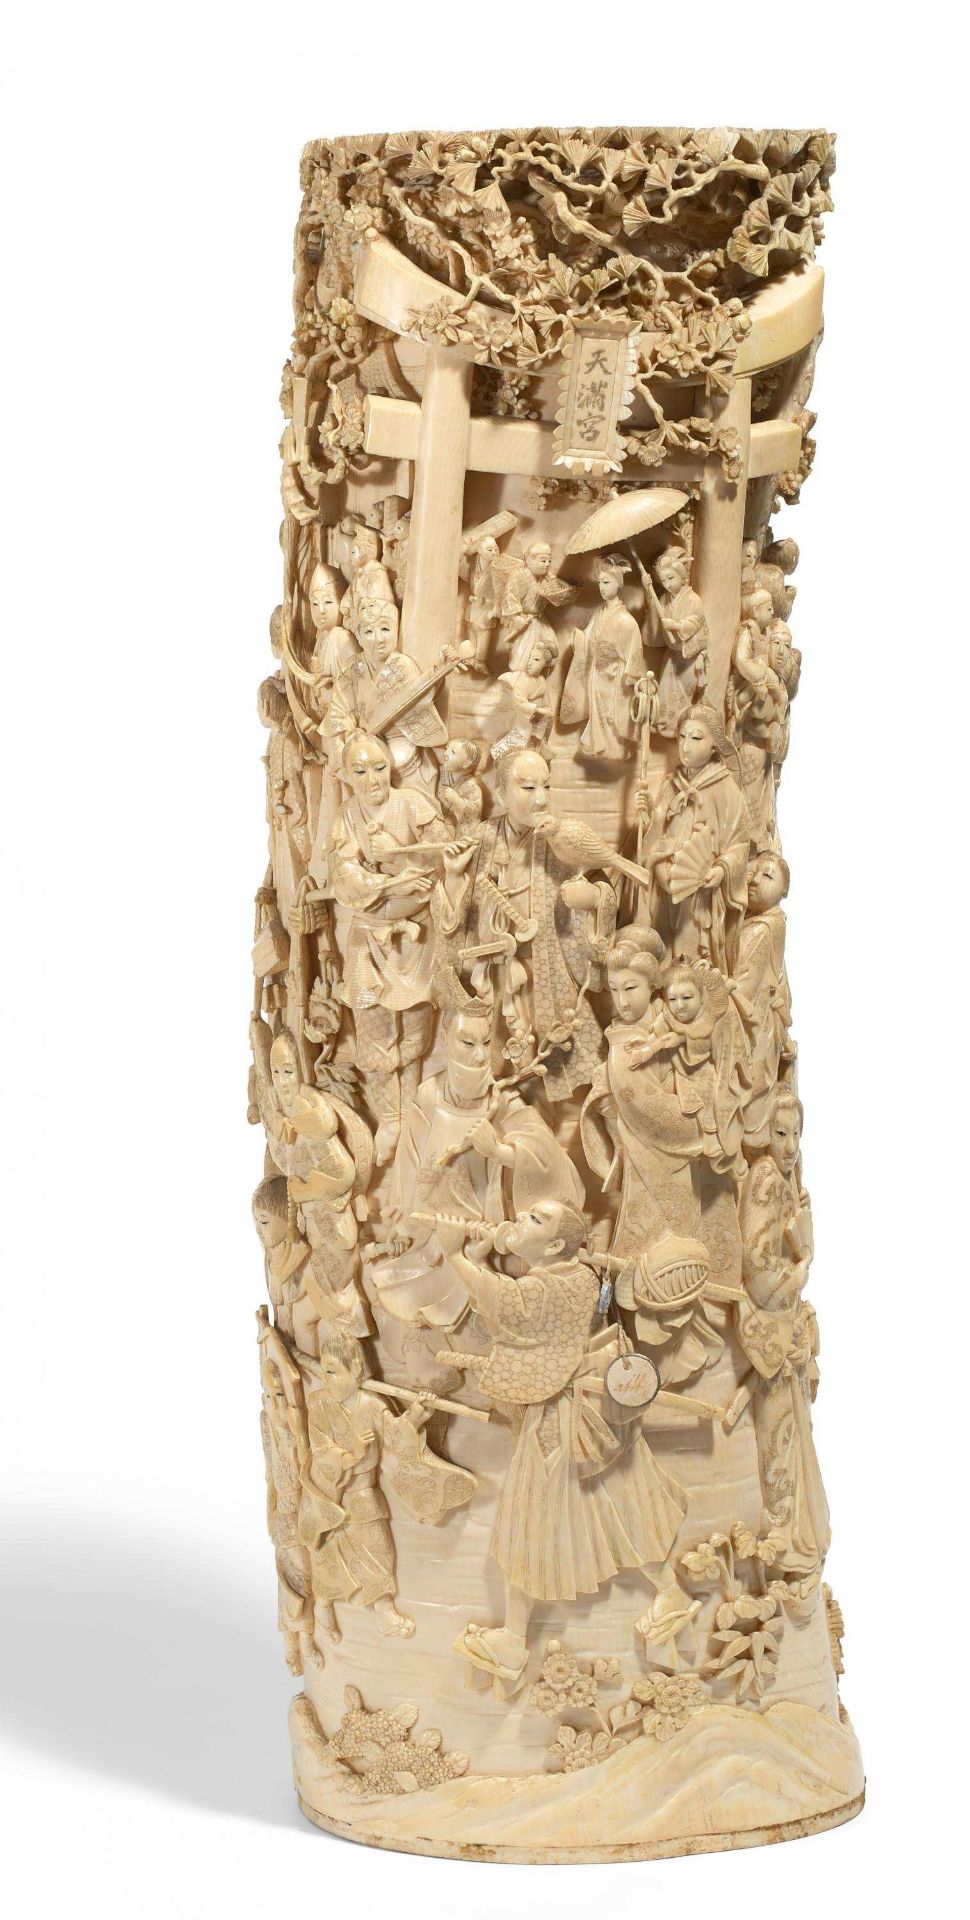 SPECTACULAR BRUSHSTAND WITH THE DEPICTION OF A SHRINE FESTIVAL. Japan. Meiji period, middle 19th